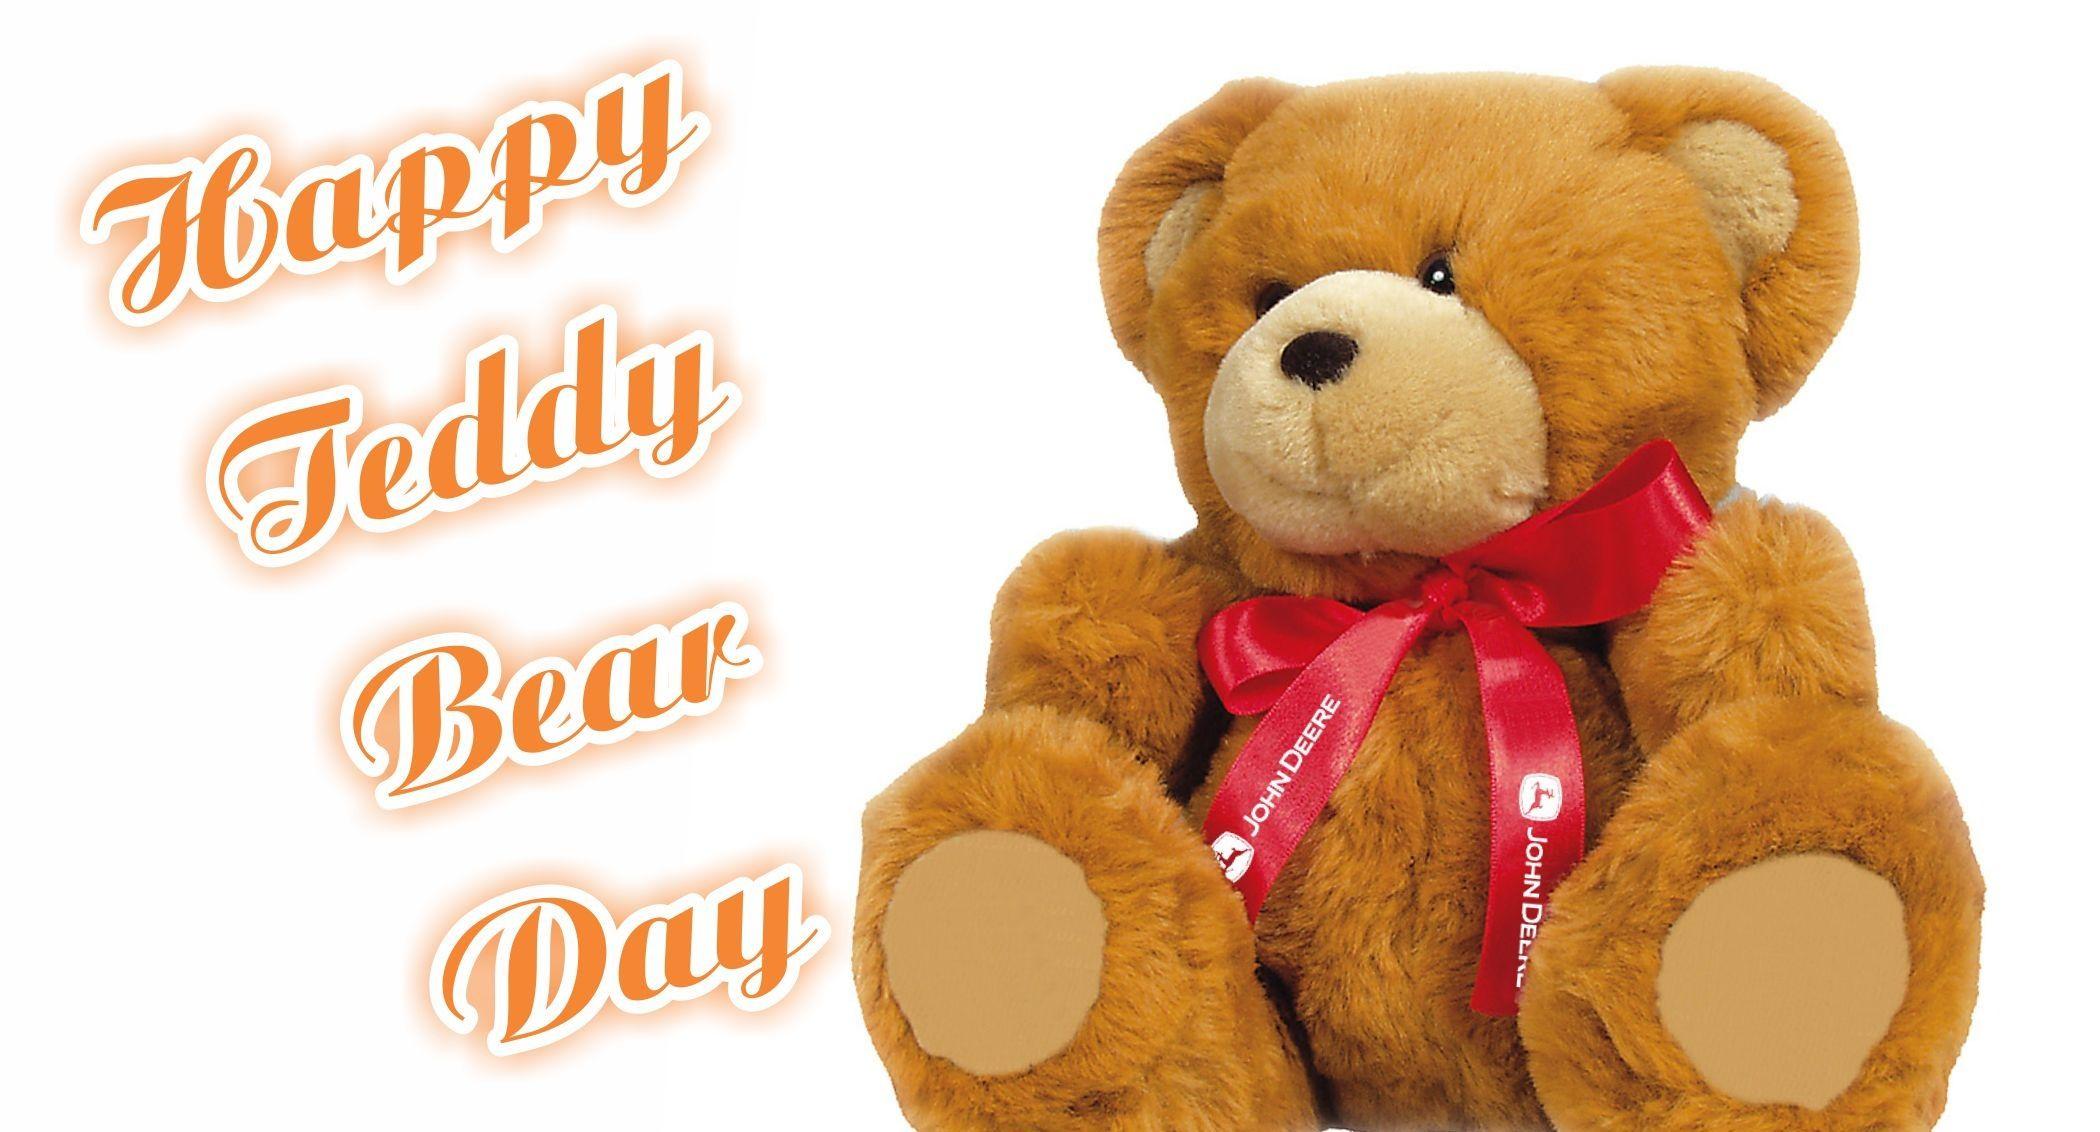 happy Teddy Bear Day ( Teddy Day) 2015 HD Image With Quotes